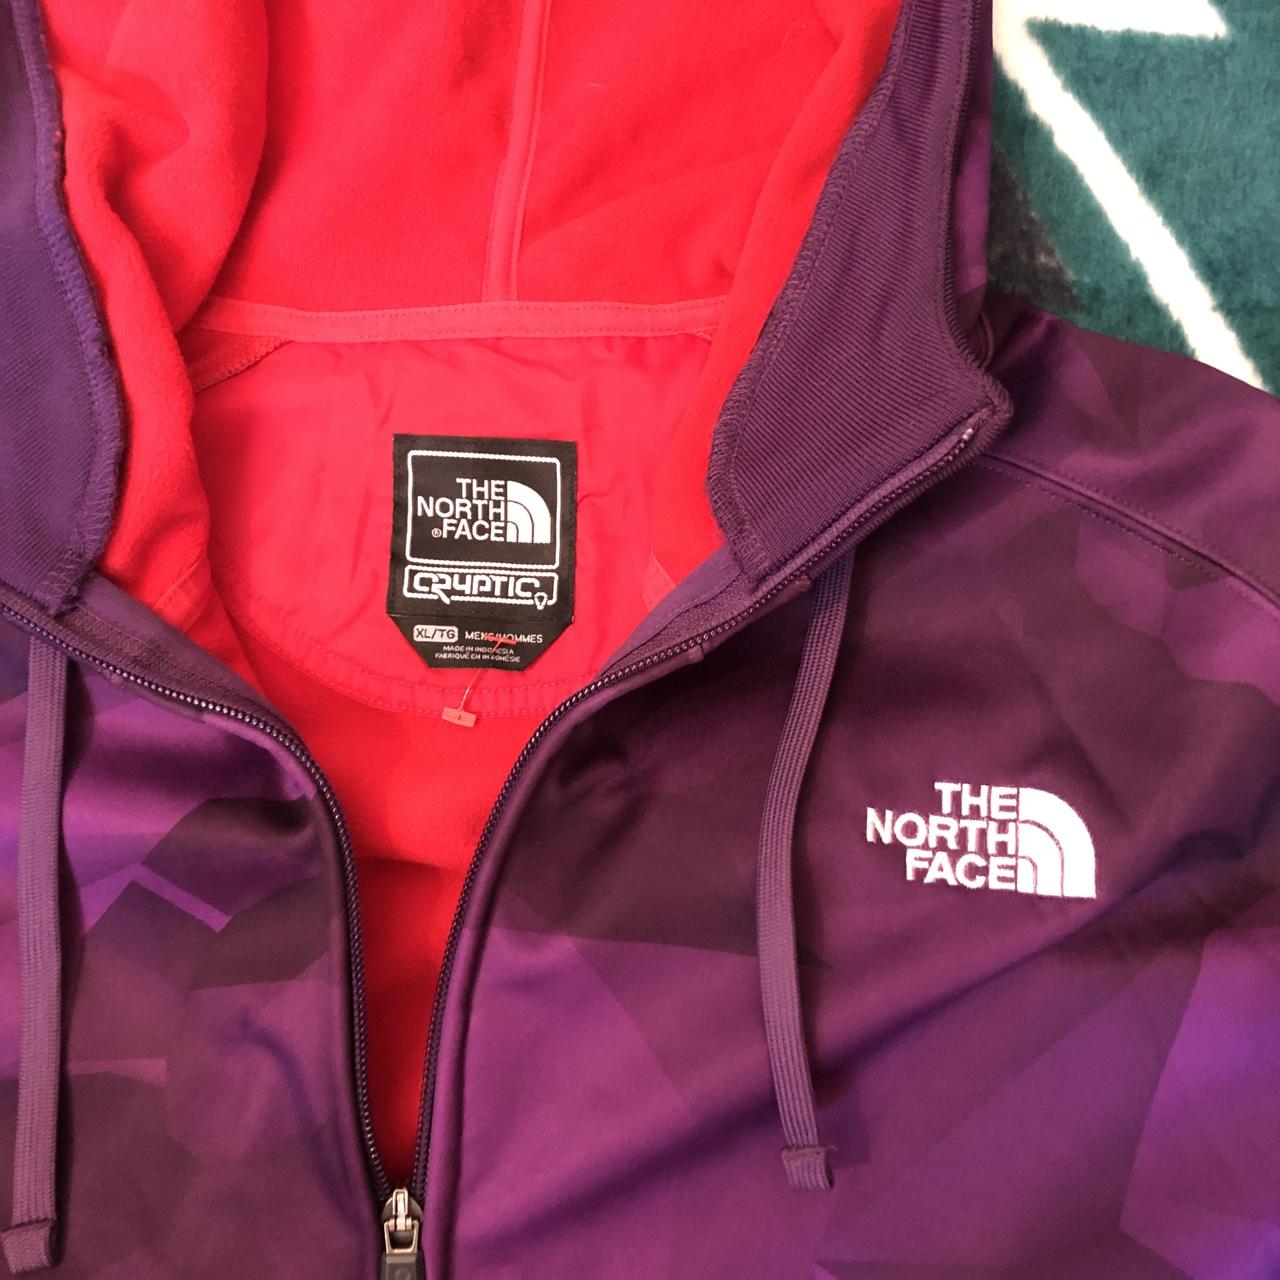 THE NORTH FACE x CRYPTIC TNF APEX JACKET. w/ HOODIE - Depop